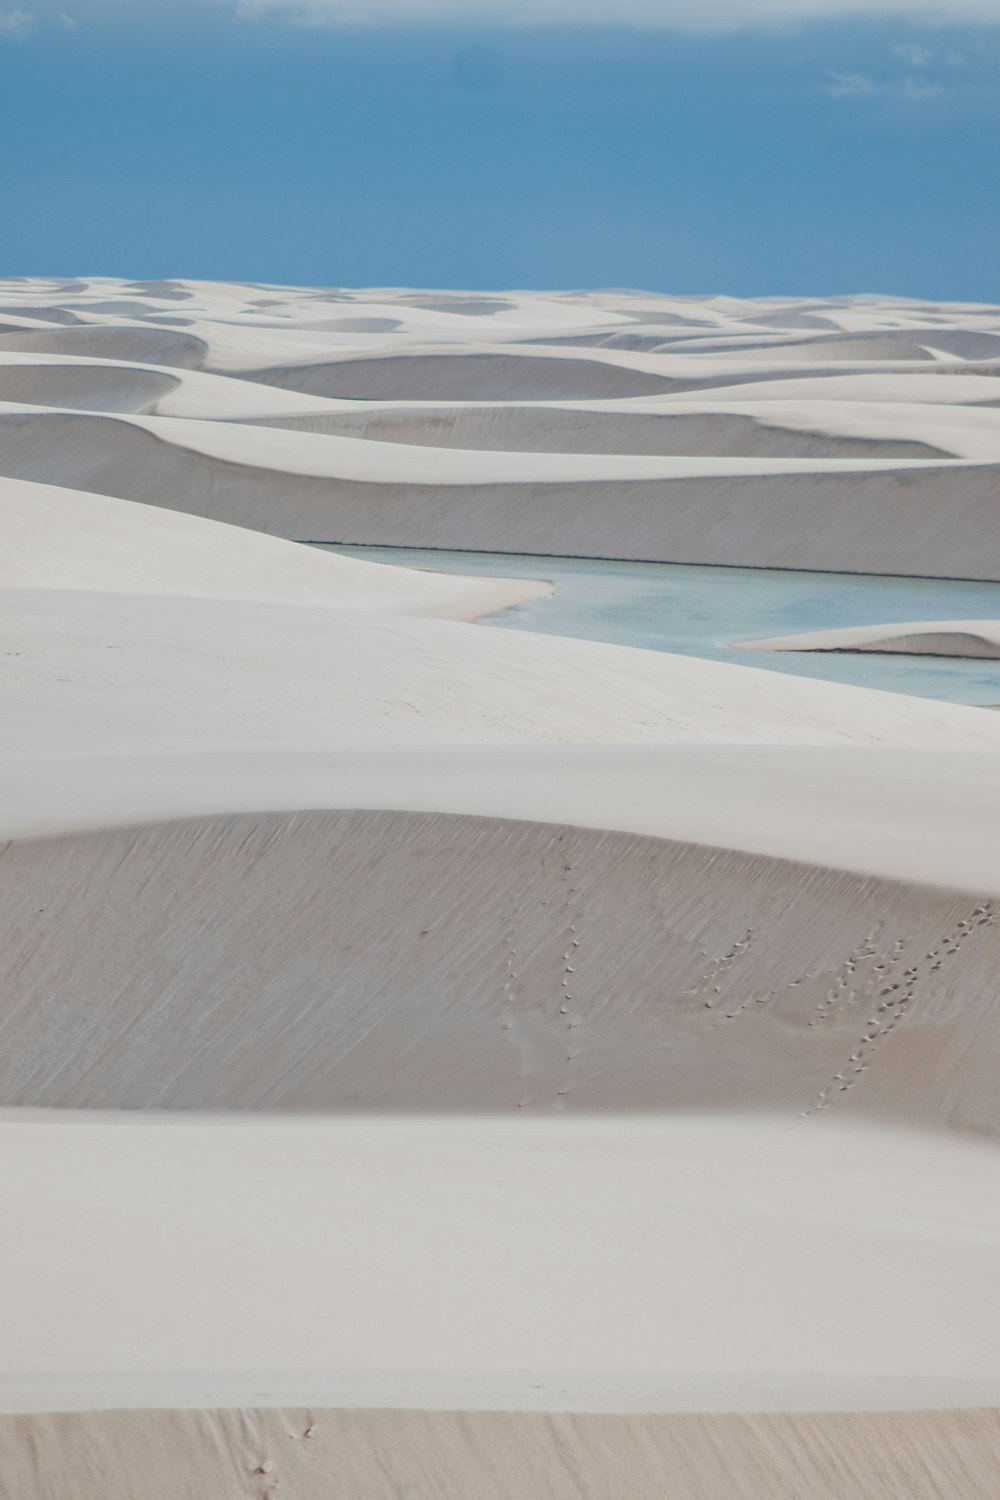 a large expanse of sand dunes with a body of water in the distance